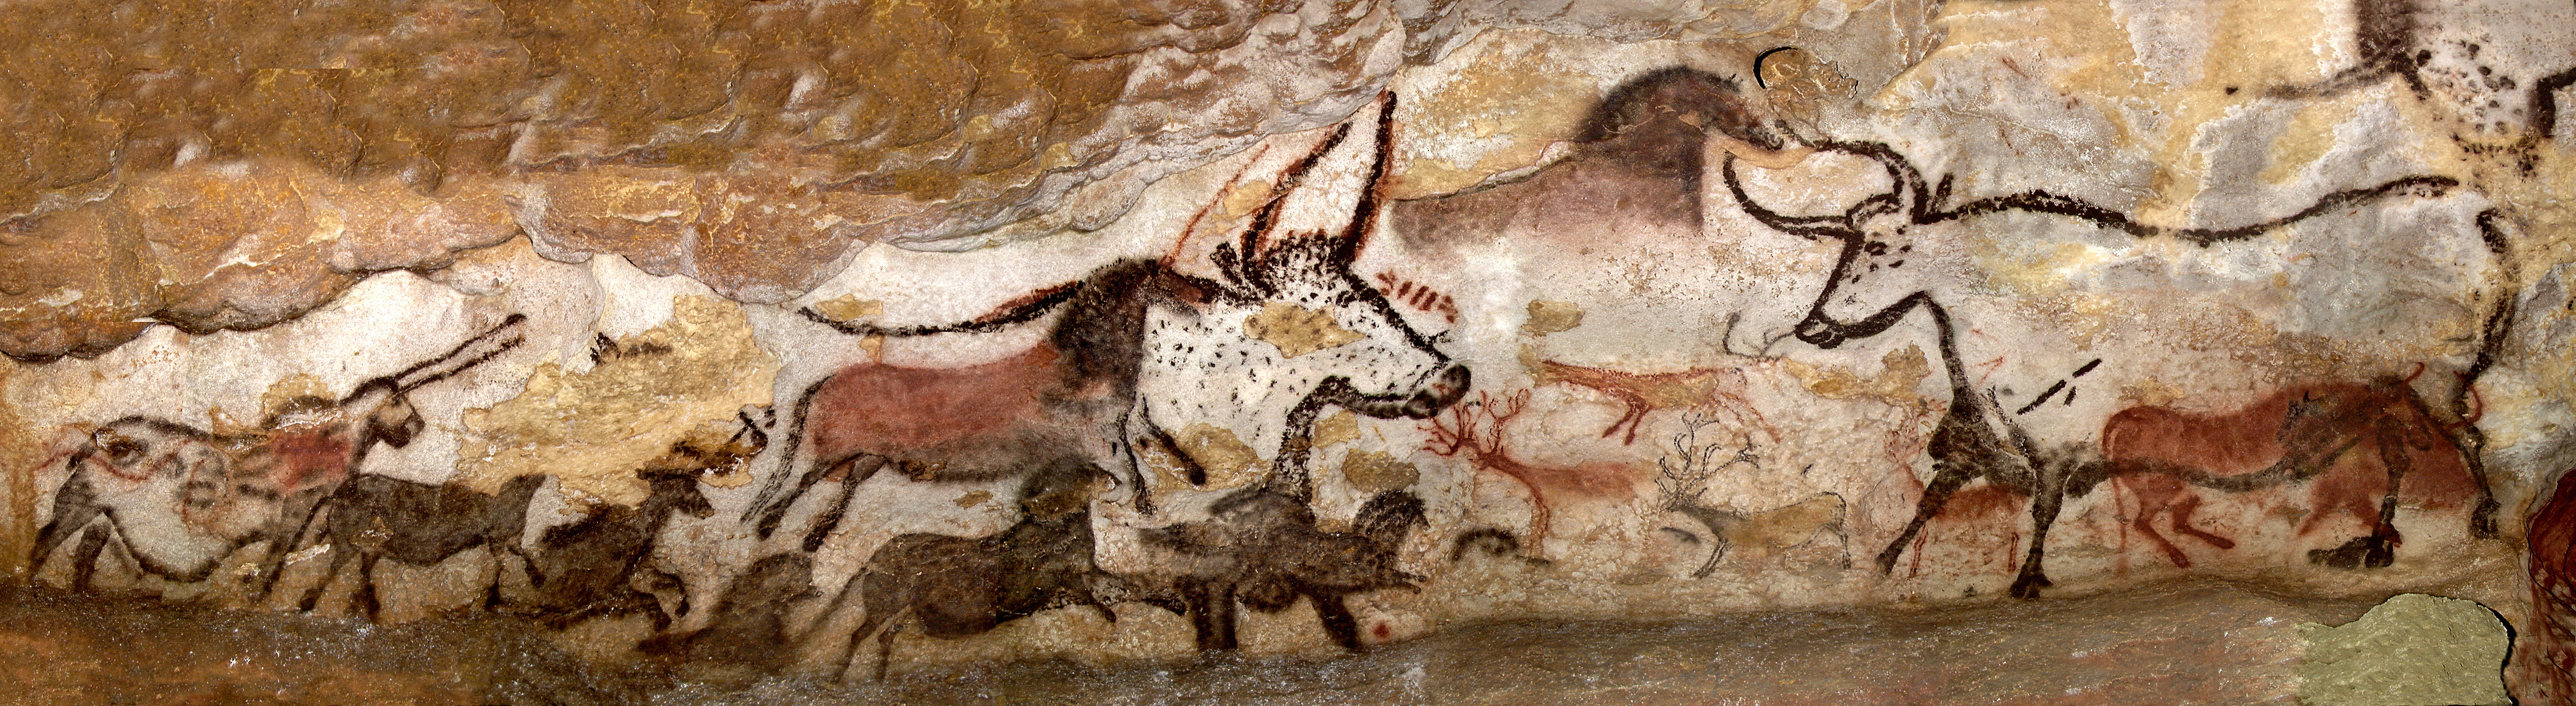 Lascaux: A section of one side of the Chamber of the Bulls from the Lascaux cave.